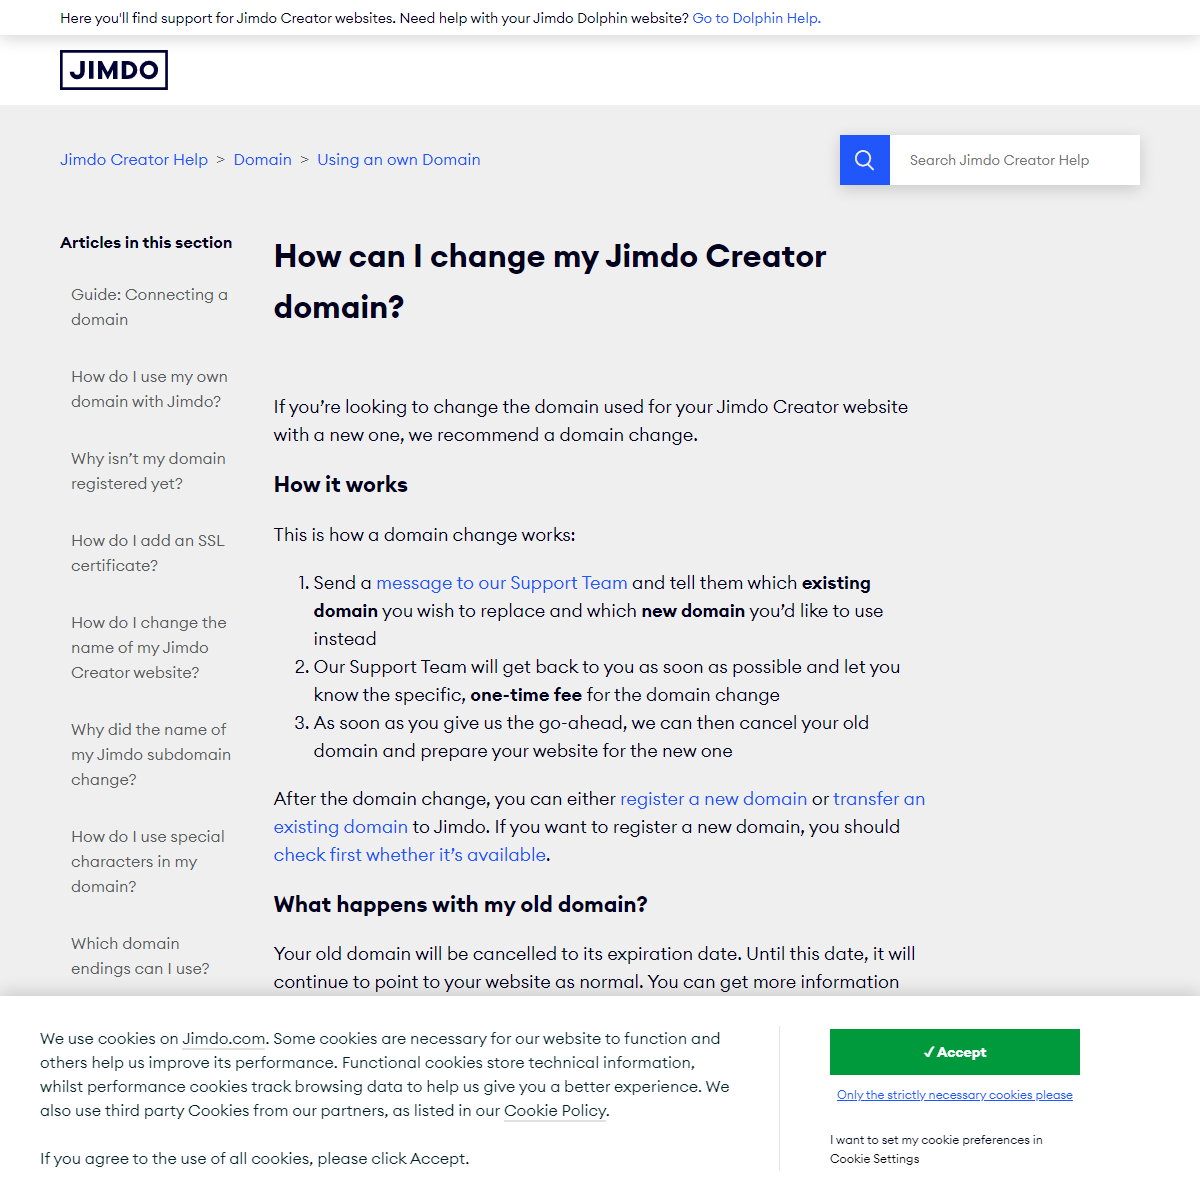 A complete backup of https://help.jimdo.com/hc/en-us/articles/115005510143-How-can-I-change-my-Jimdo-Creator-domain-